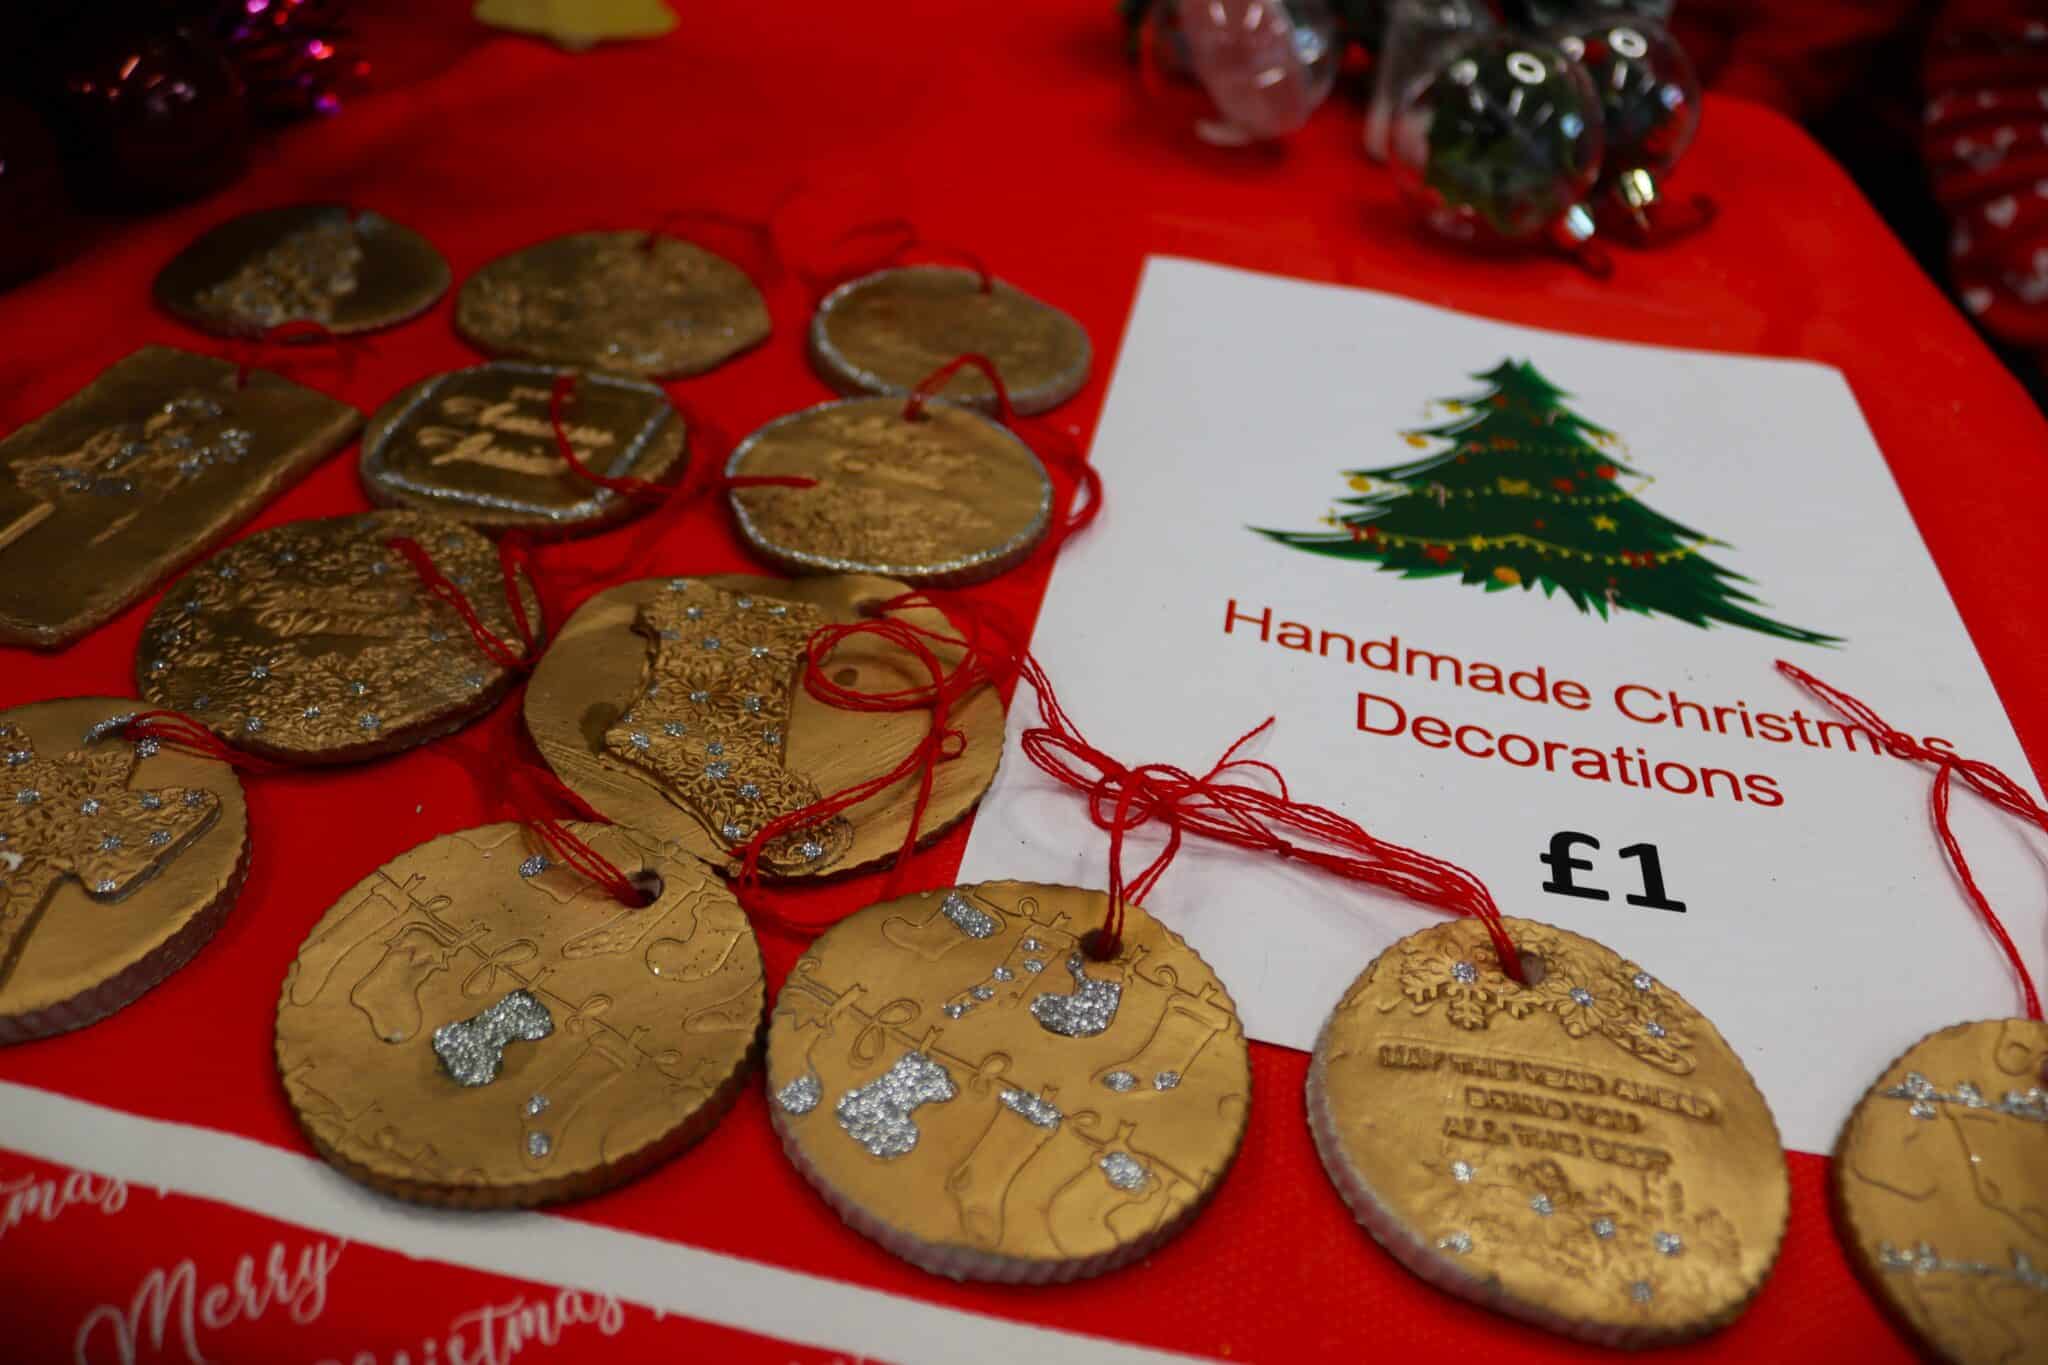 Foundation Learning students get into the Christmas business - tree gold decorations